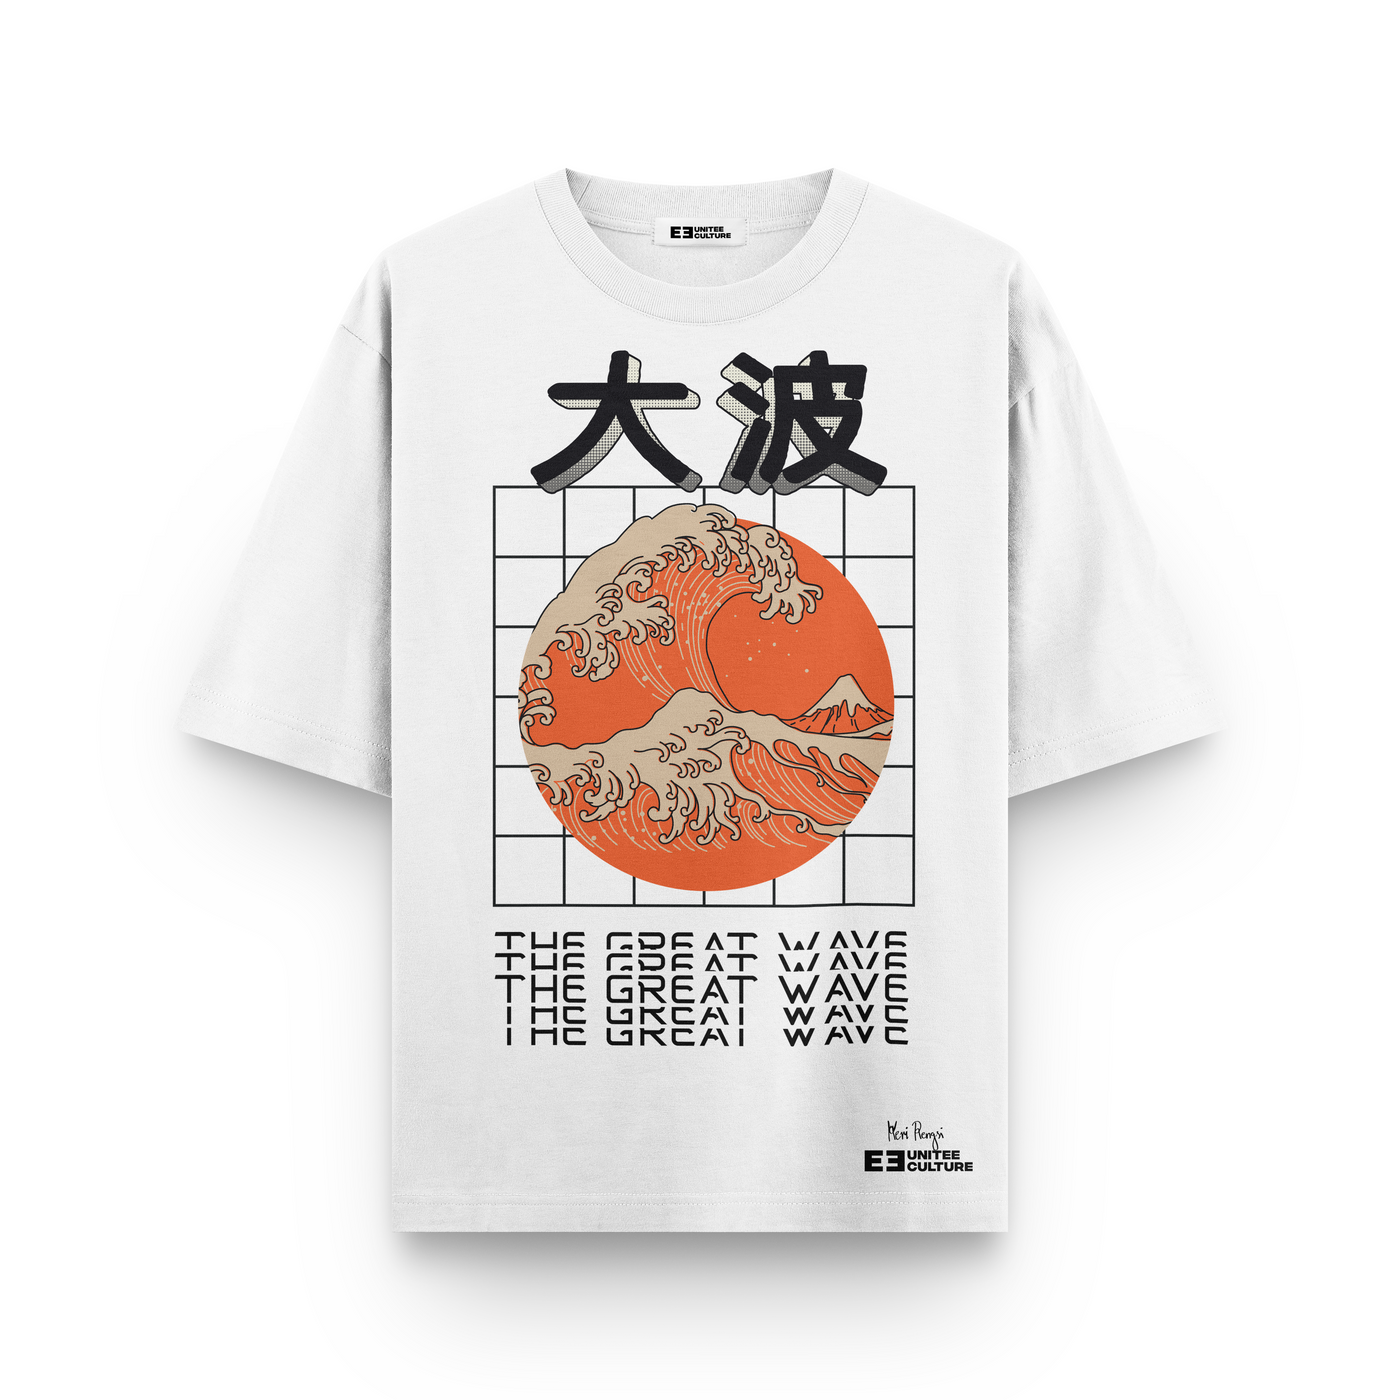 The Great Wave white tee